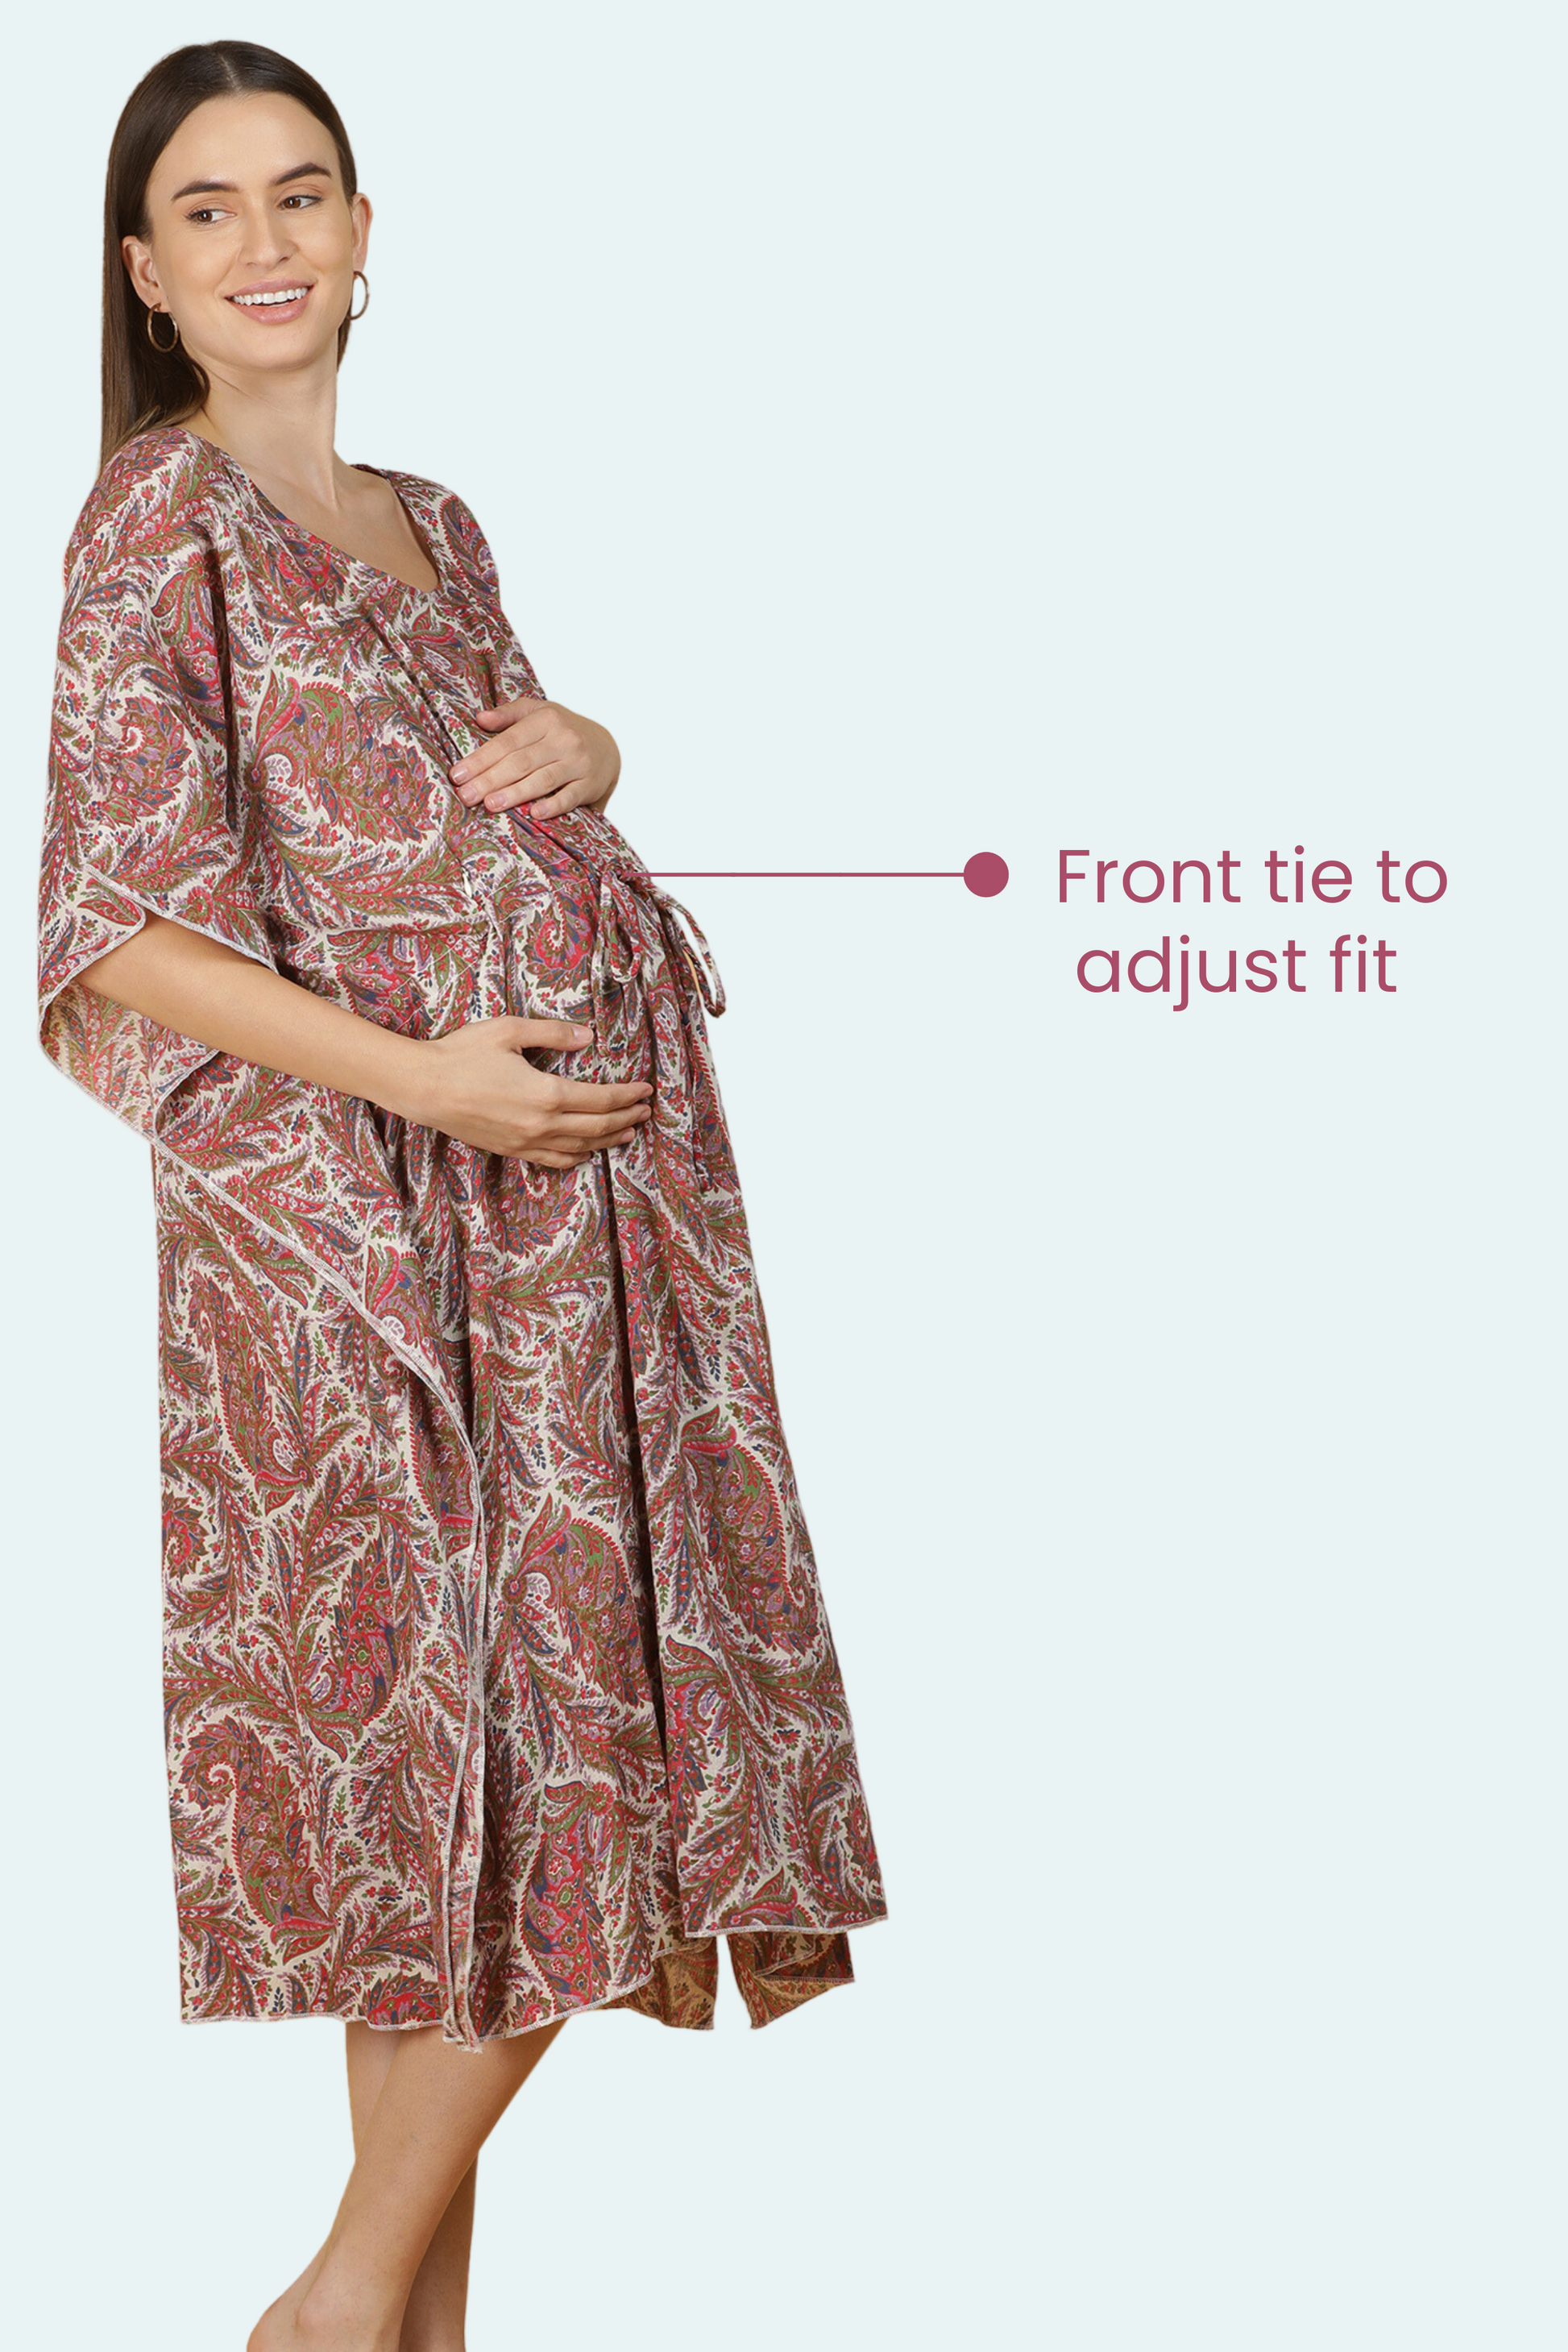 Feeding Dress With Front Tie To Adjust Fit